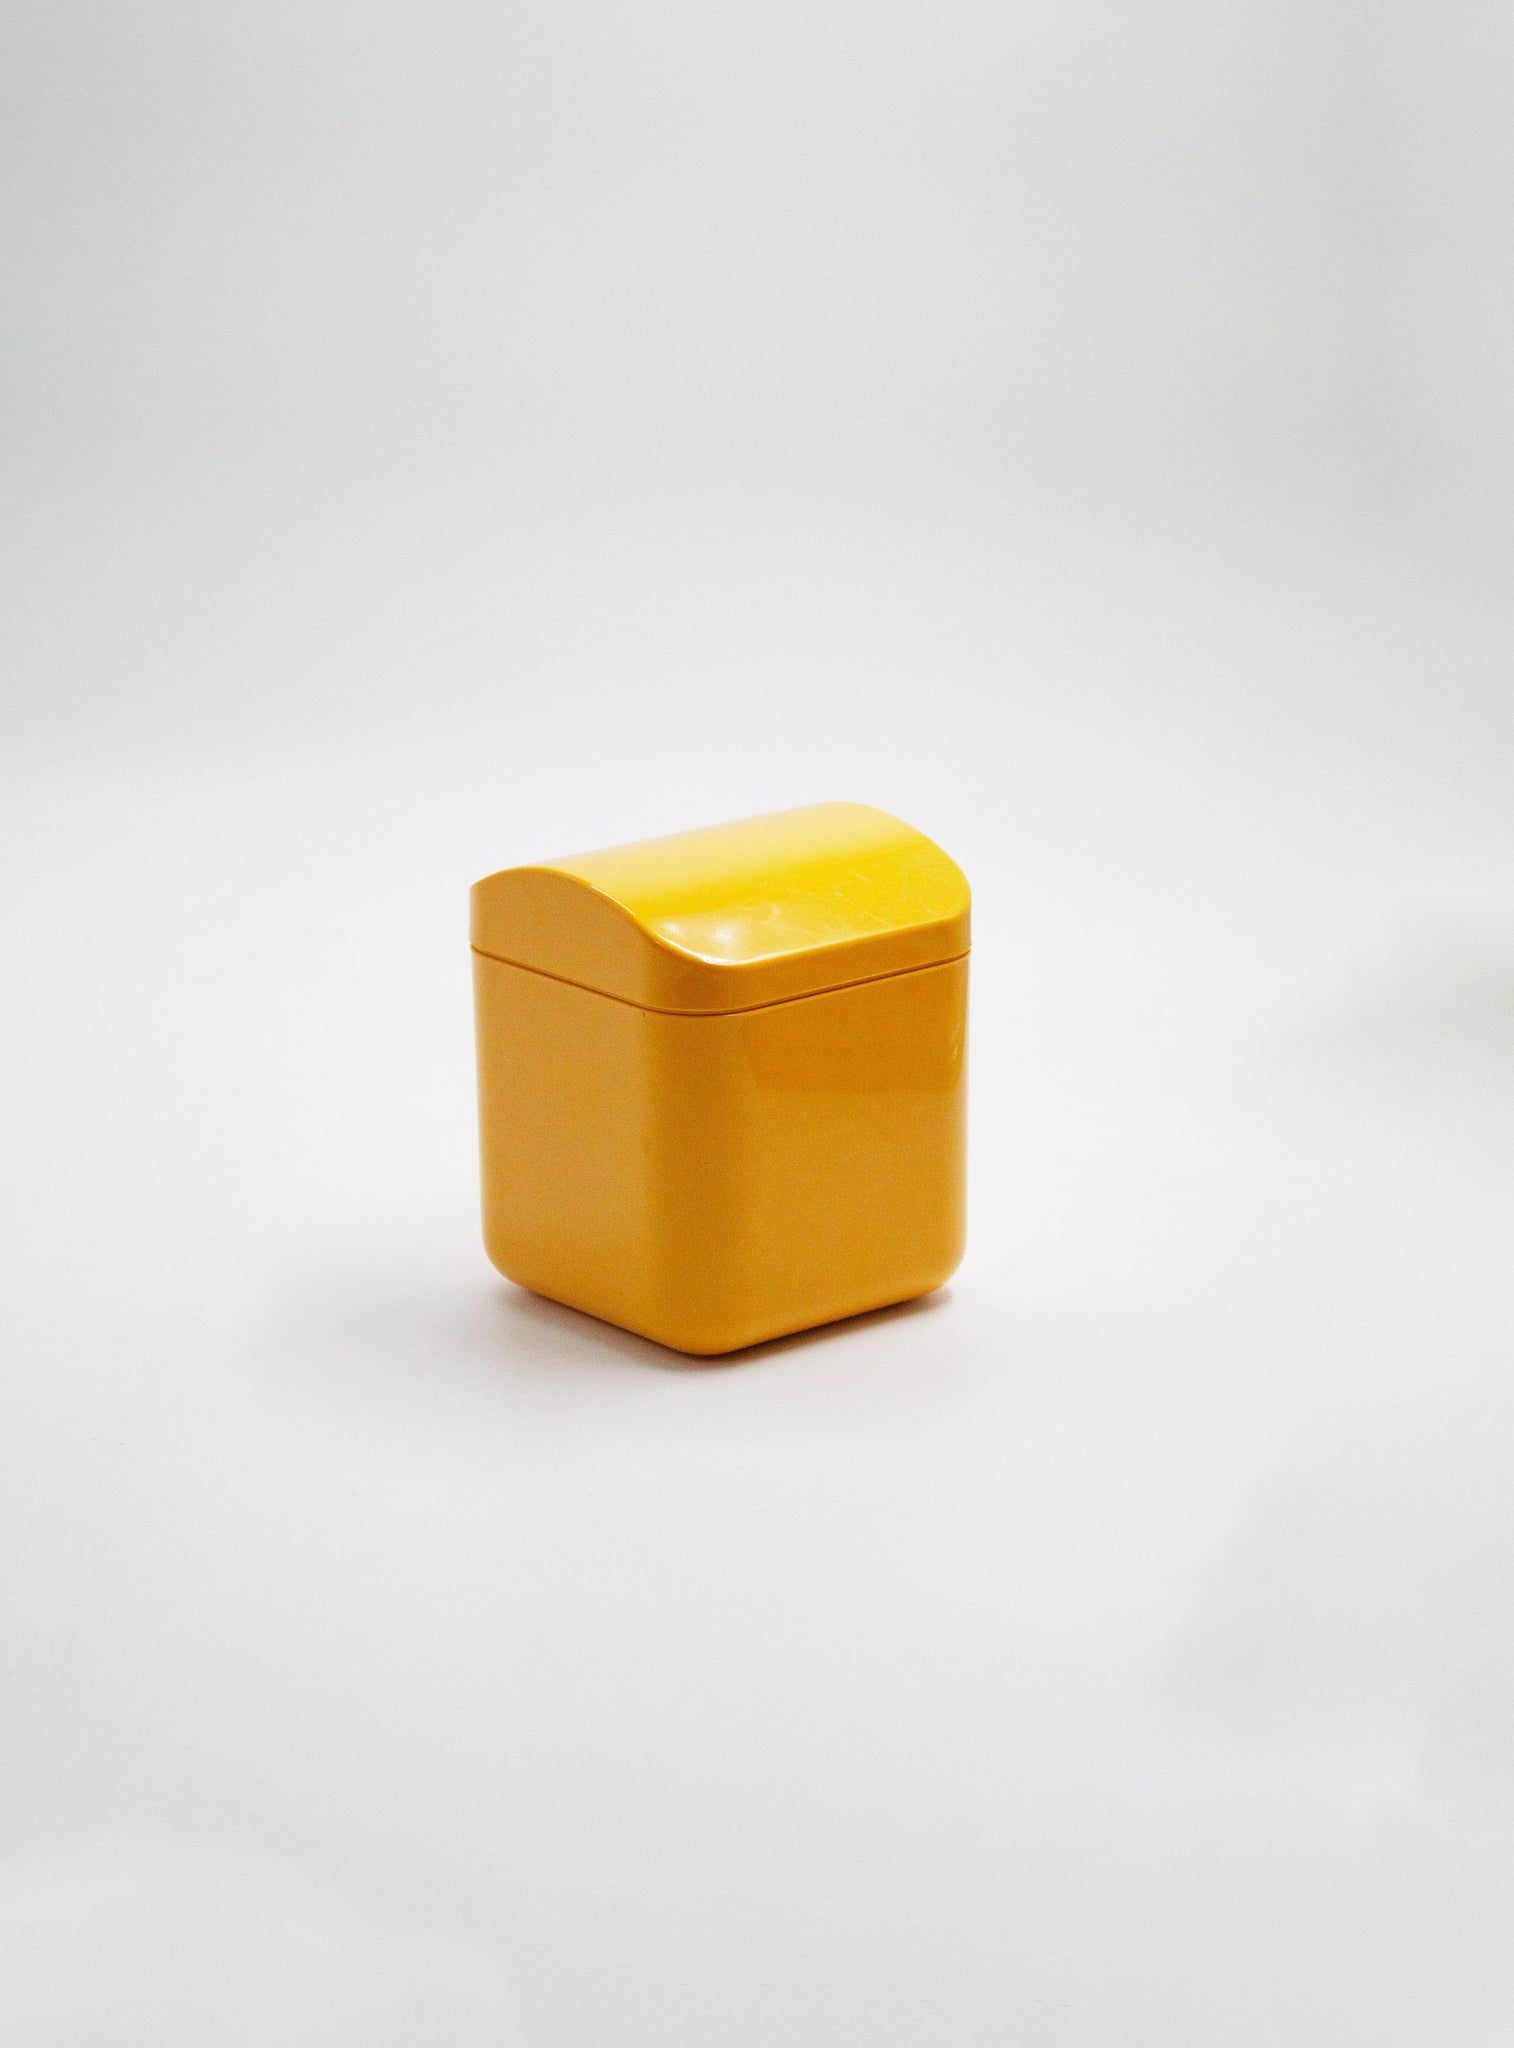 Gedy Small Container / Jar by Makio Hasuike (Yellow)